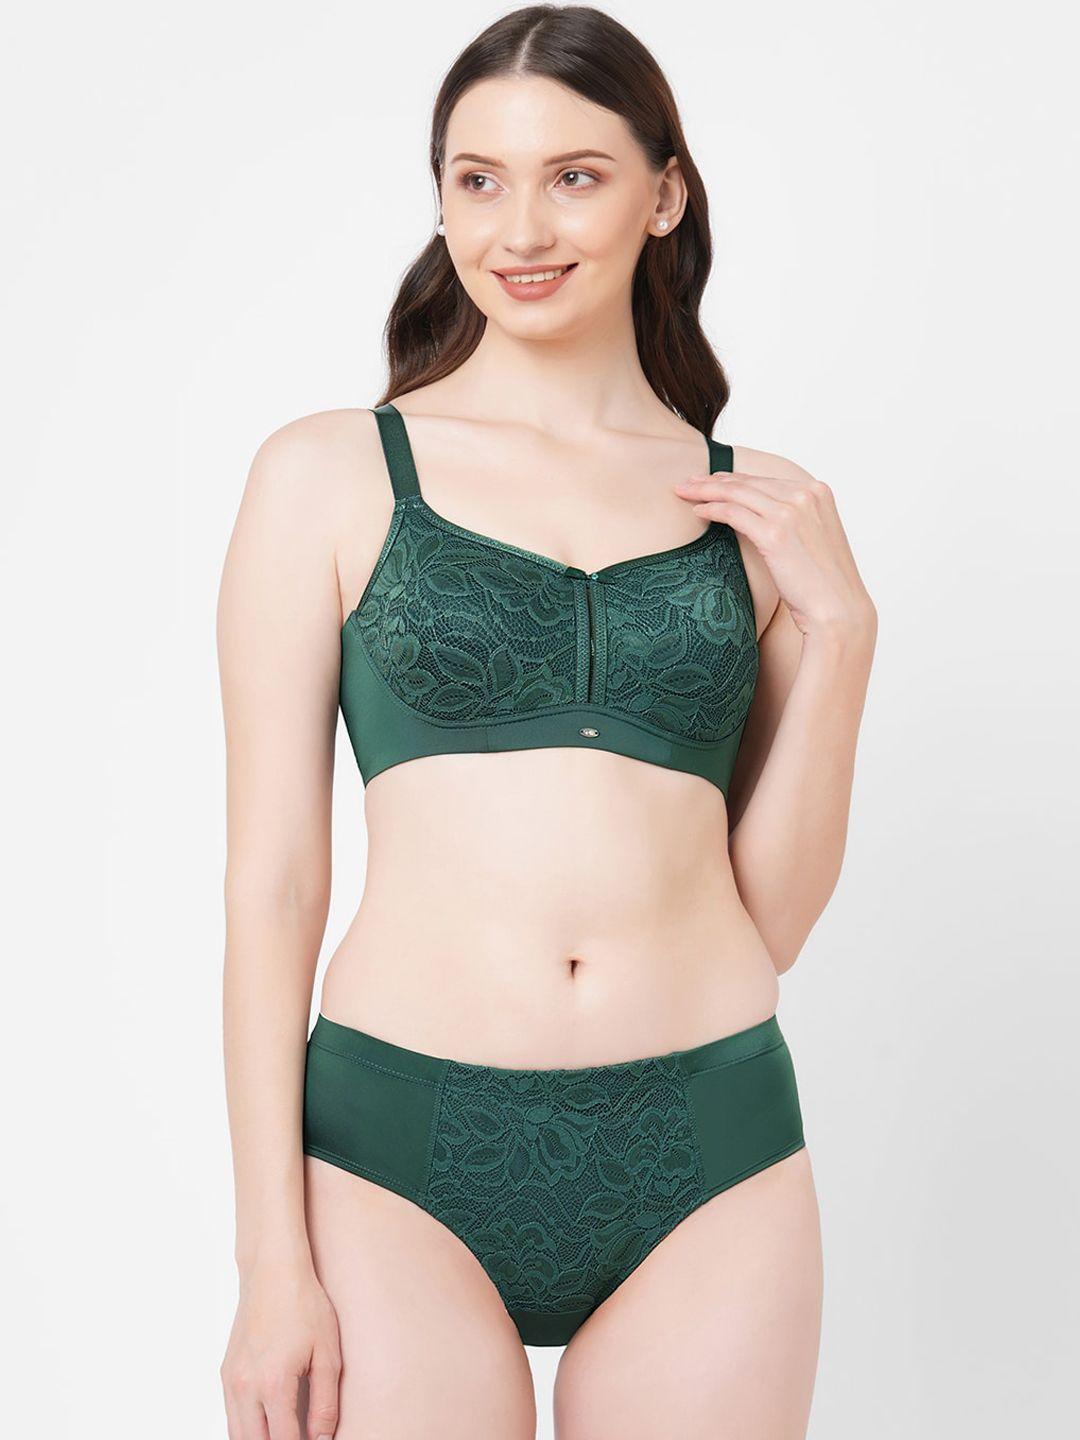 soie-women-green-solid-full-coverage-padded-non-wired-lace-lingerie-set